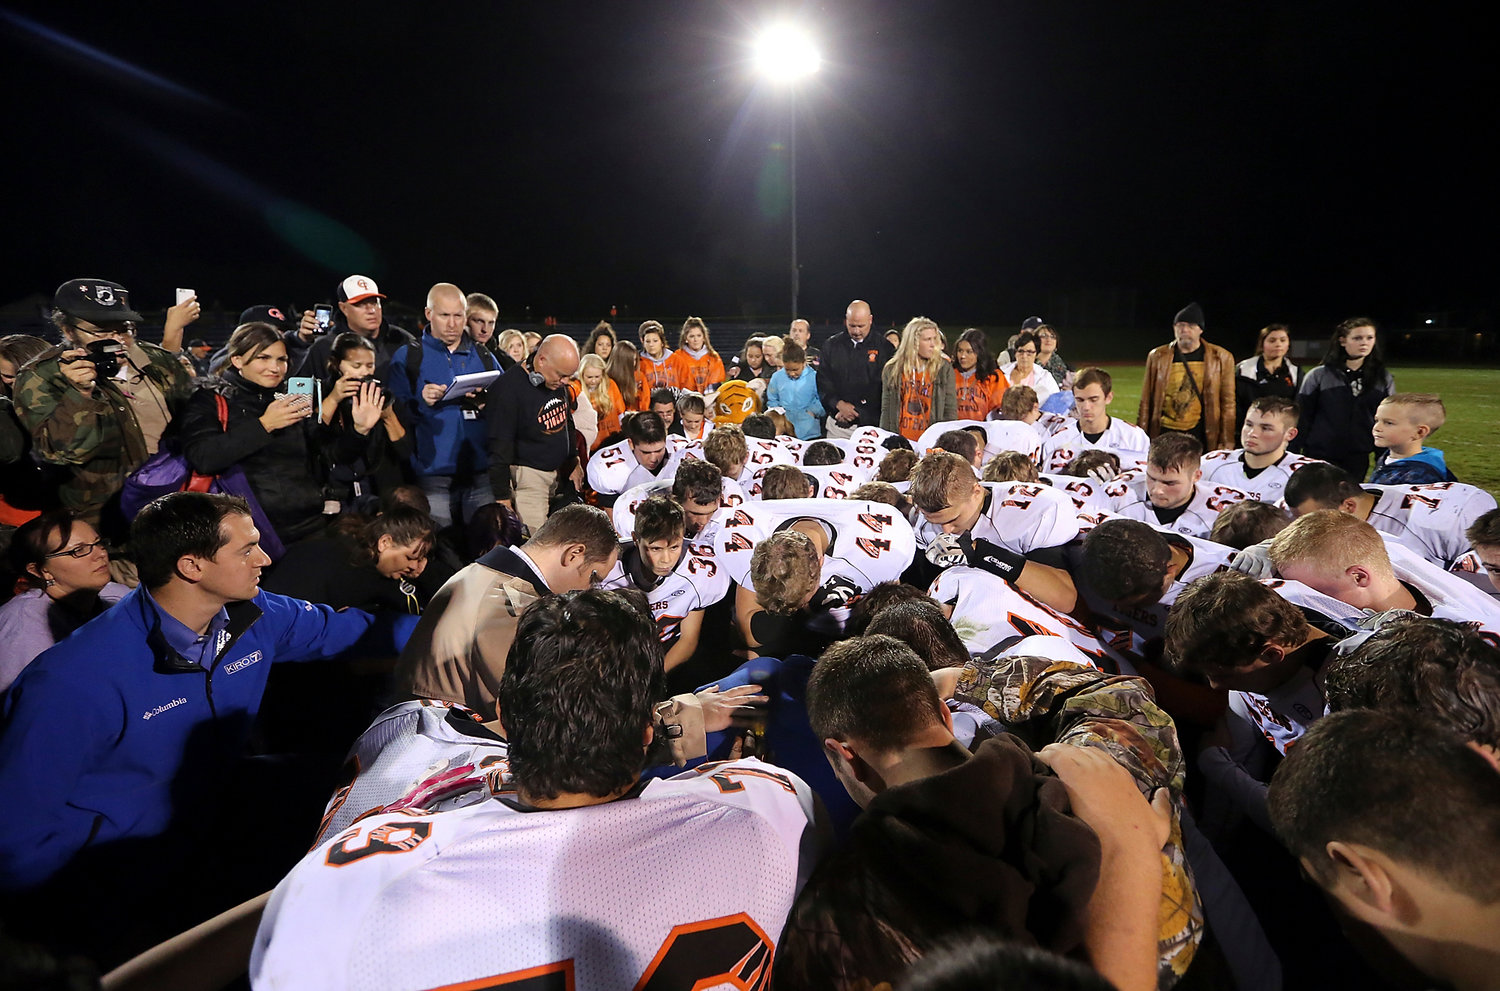 In this Friday, Oct. 16, 2015, photo, Bremerton assistant football coach Joe Kennedy, obscured at center in blue,  is surrounded by Centralia players after they took a knee with him and prayed after their game against Bremerton, in Bremerton, Wash. The Washington coach who was told by district officials to stop leading prayers after games went ahead with a prayer at the 50-yard line after a weekend game. (Meegan M. Reid/Kitsap Sun via AP) MANDATORY CREDIT